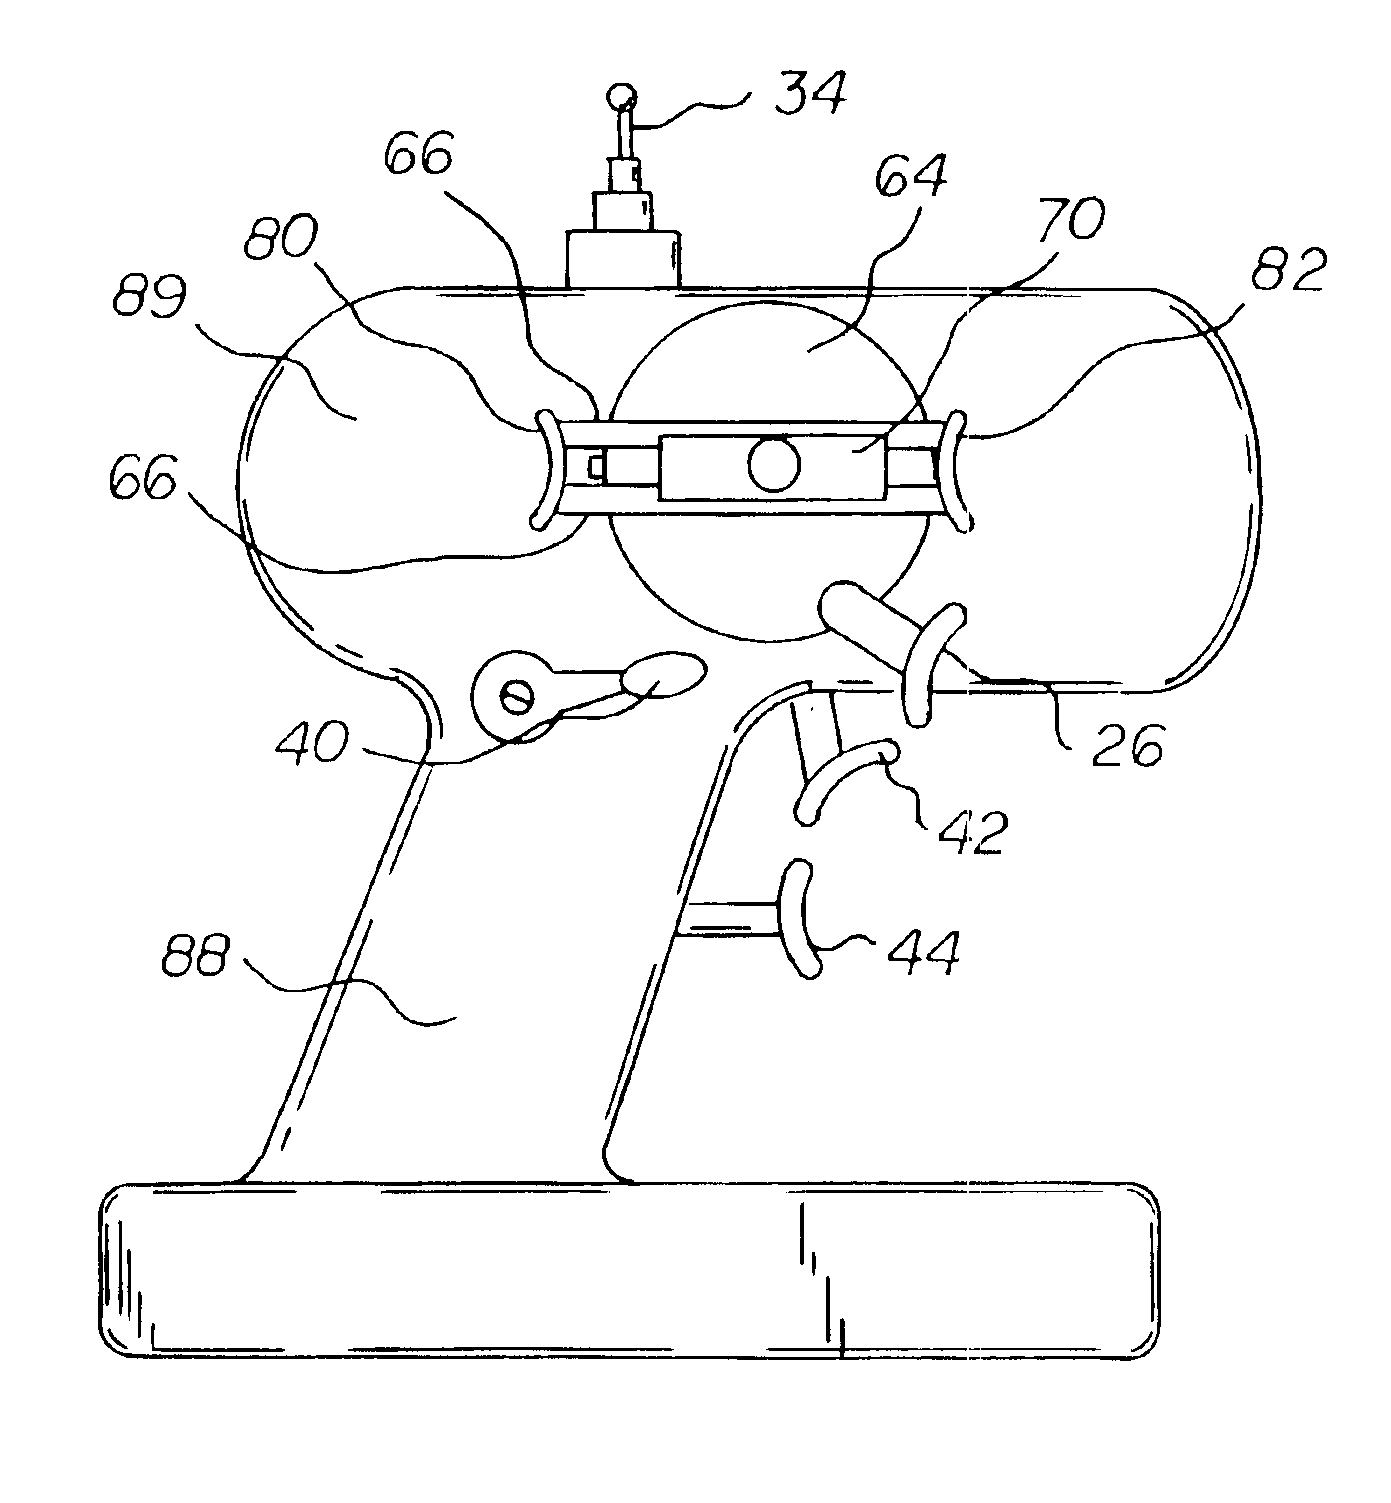 Remote control apparatus with user-operated clutch controls